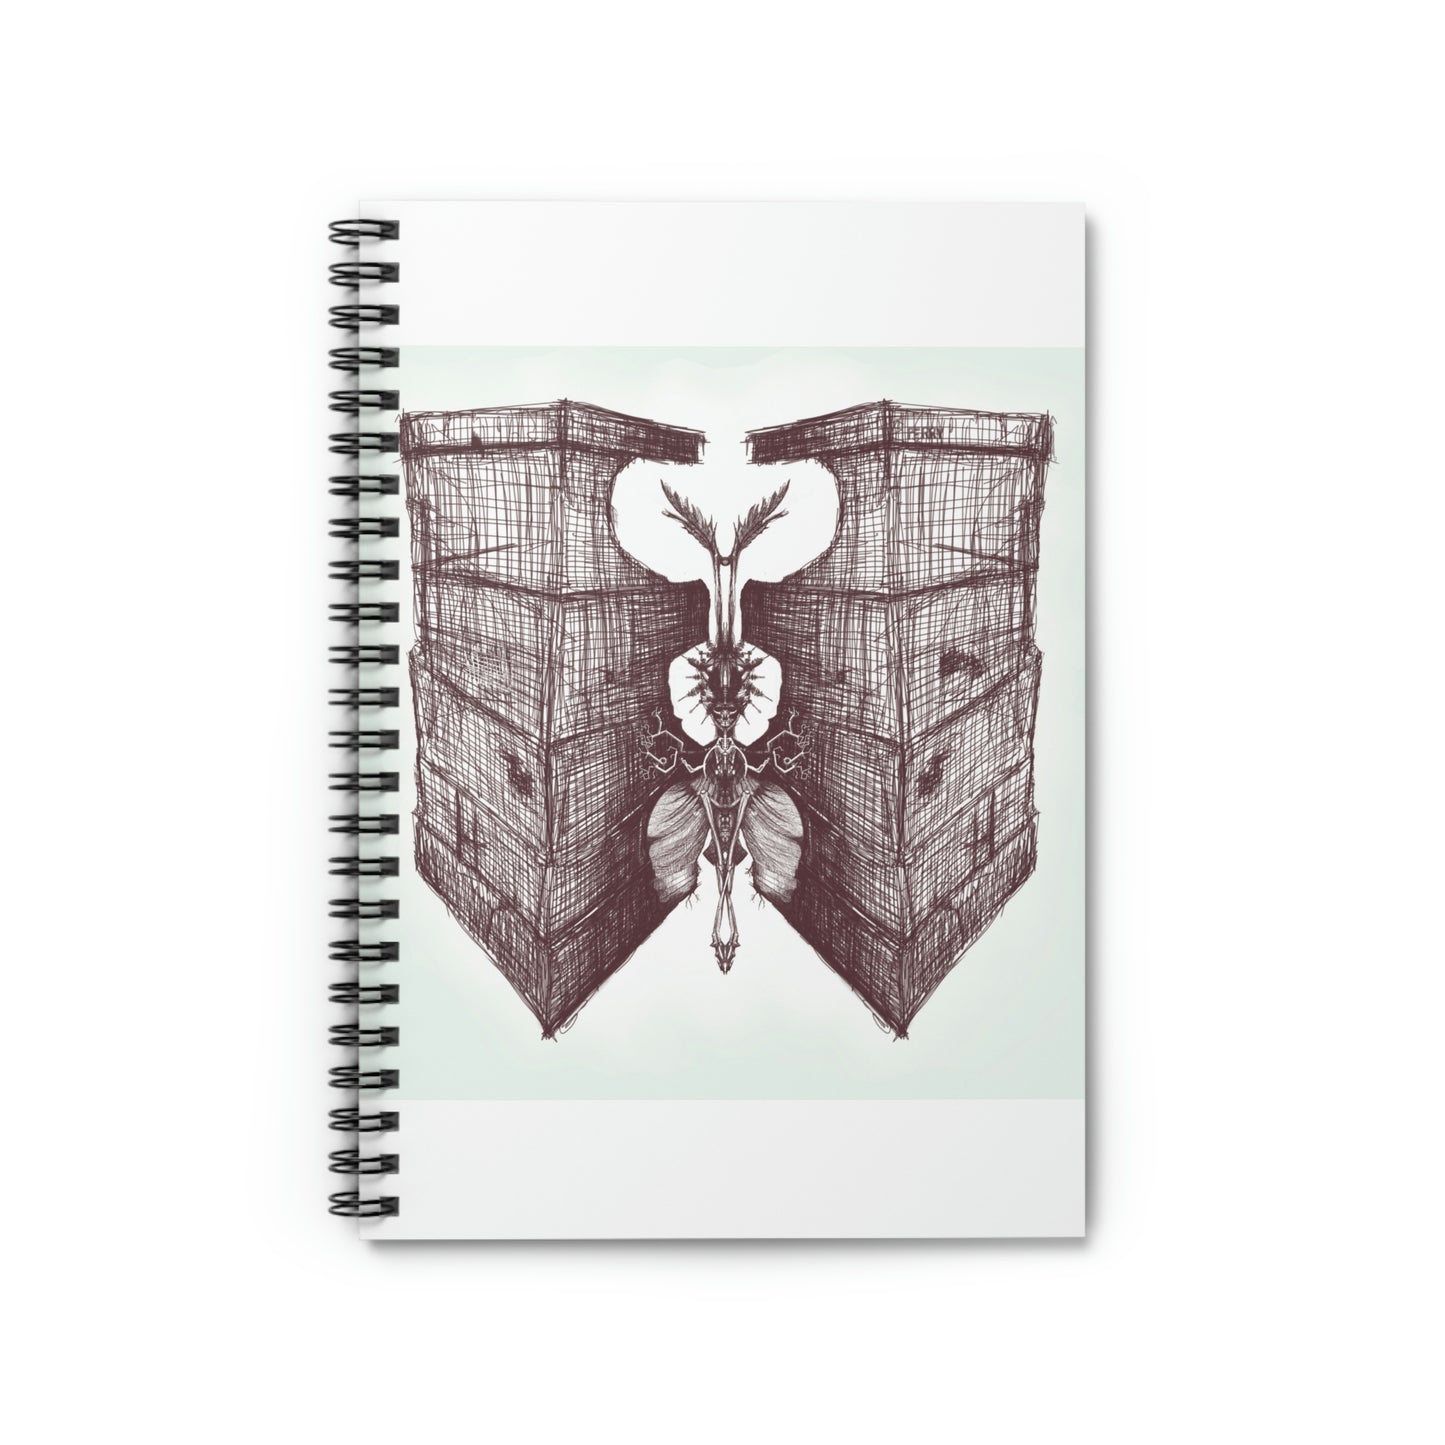 Heavy WIngs Spiral Notebook - Ruled Line